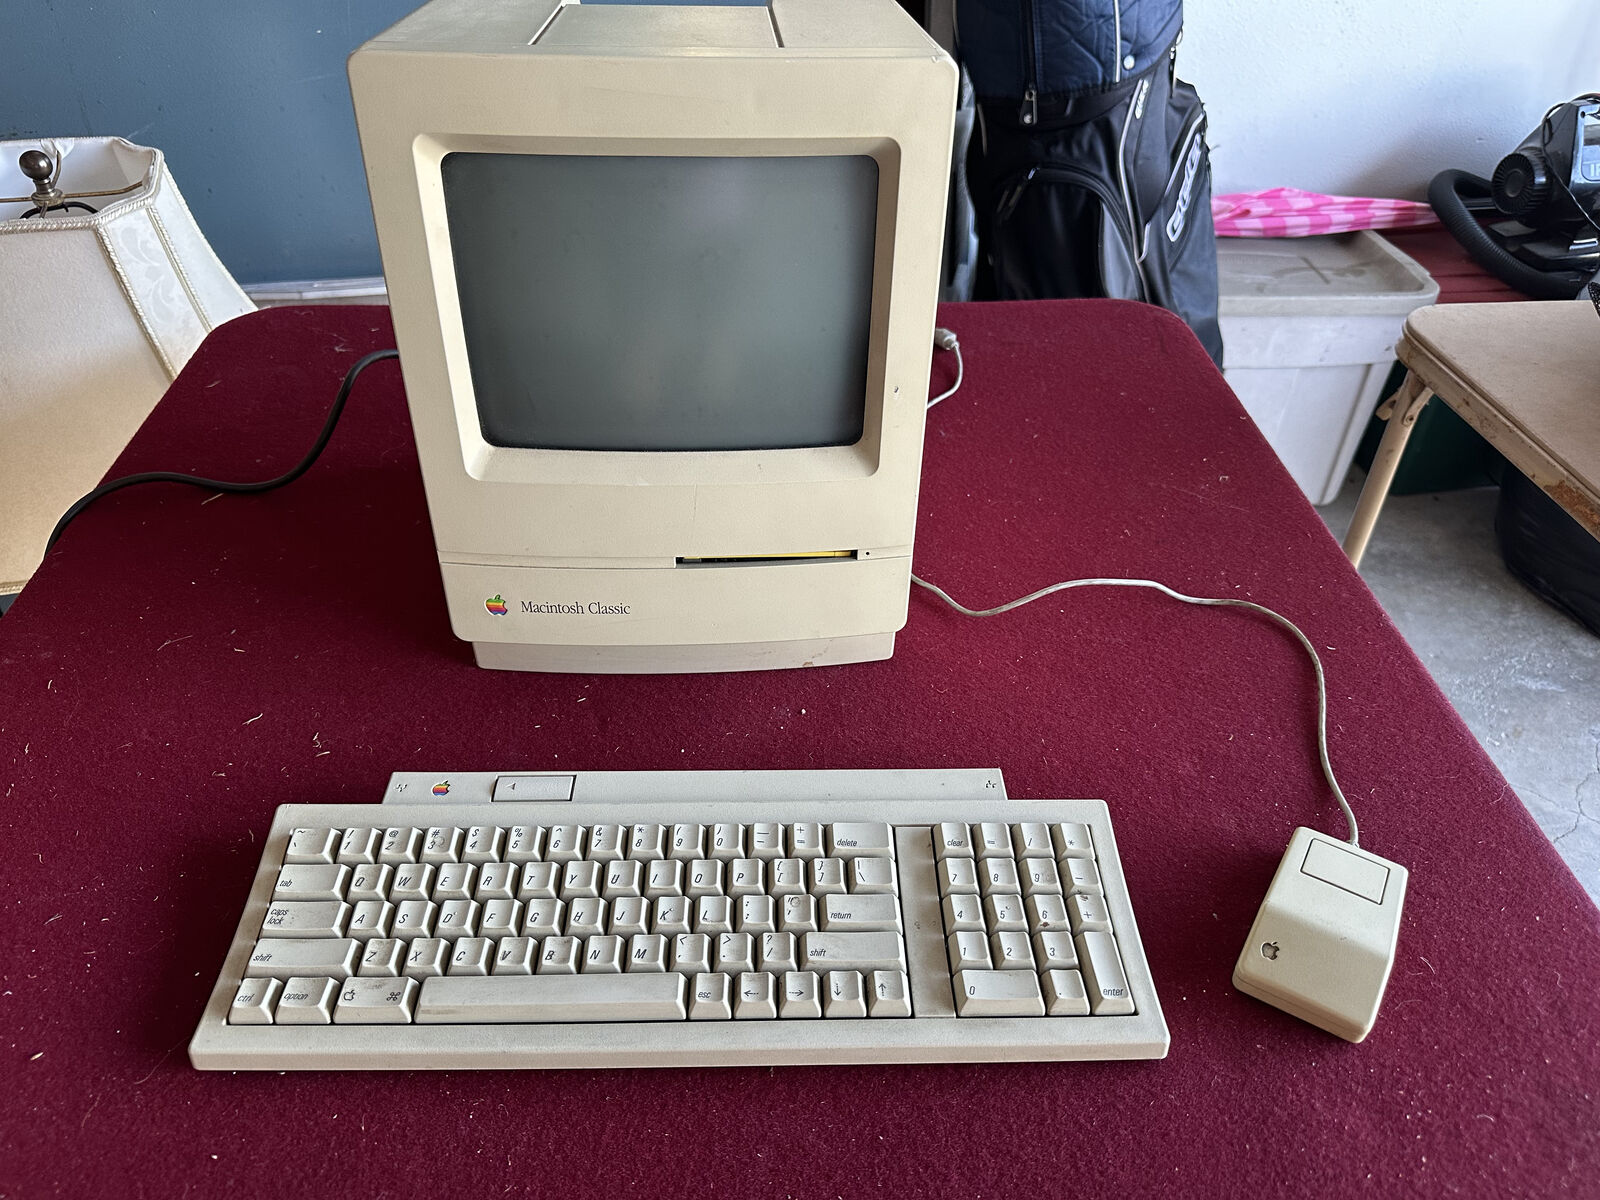 Apple Macintosh Classic M0420, has keyboard and mouse,1991